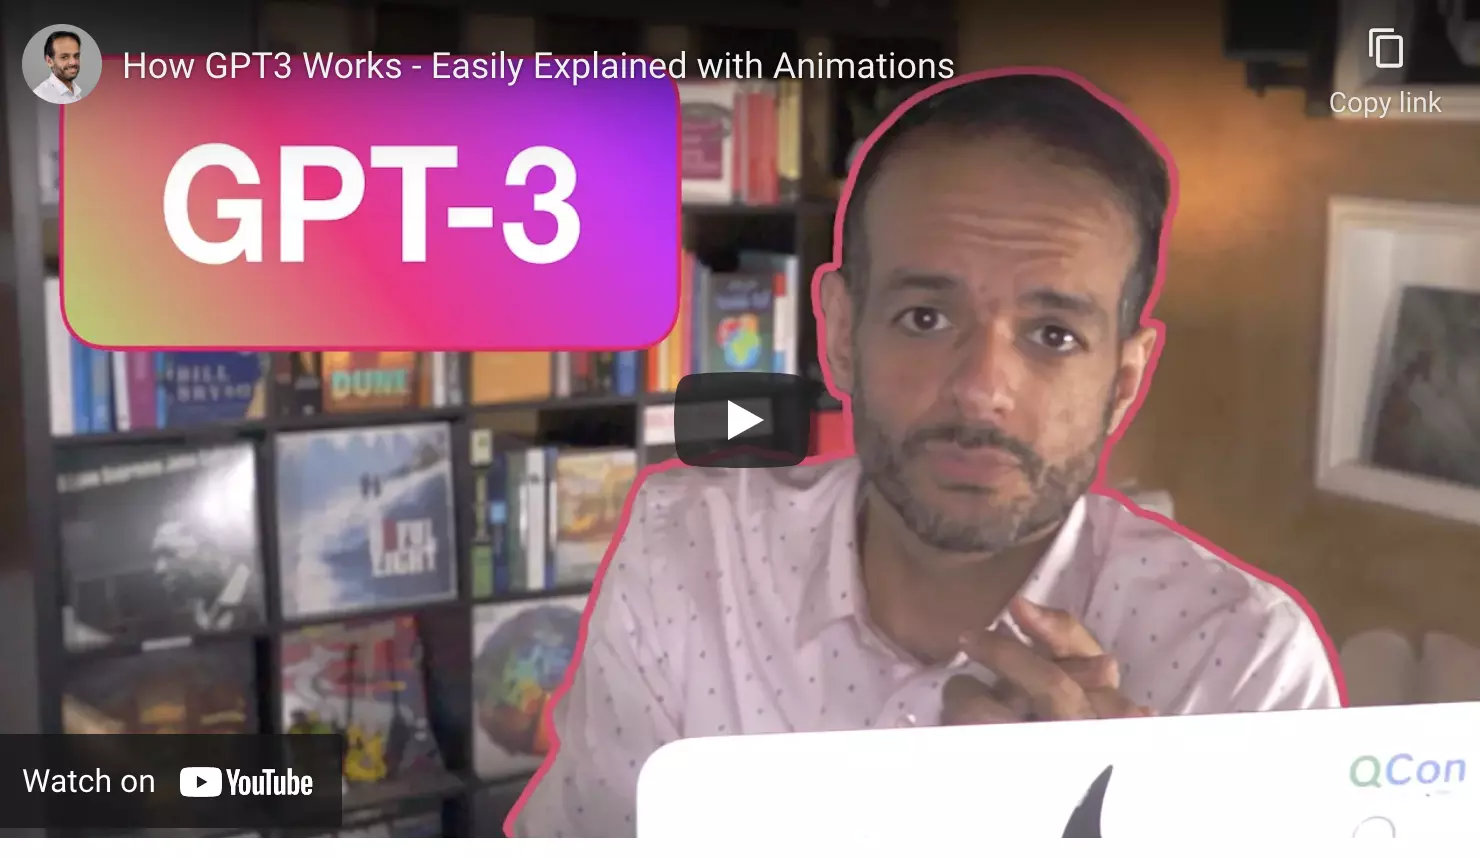 How_GPT3_Works_-_Easily_Explained_with_Animations.png